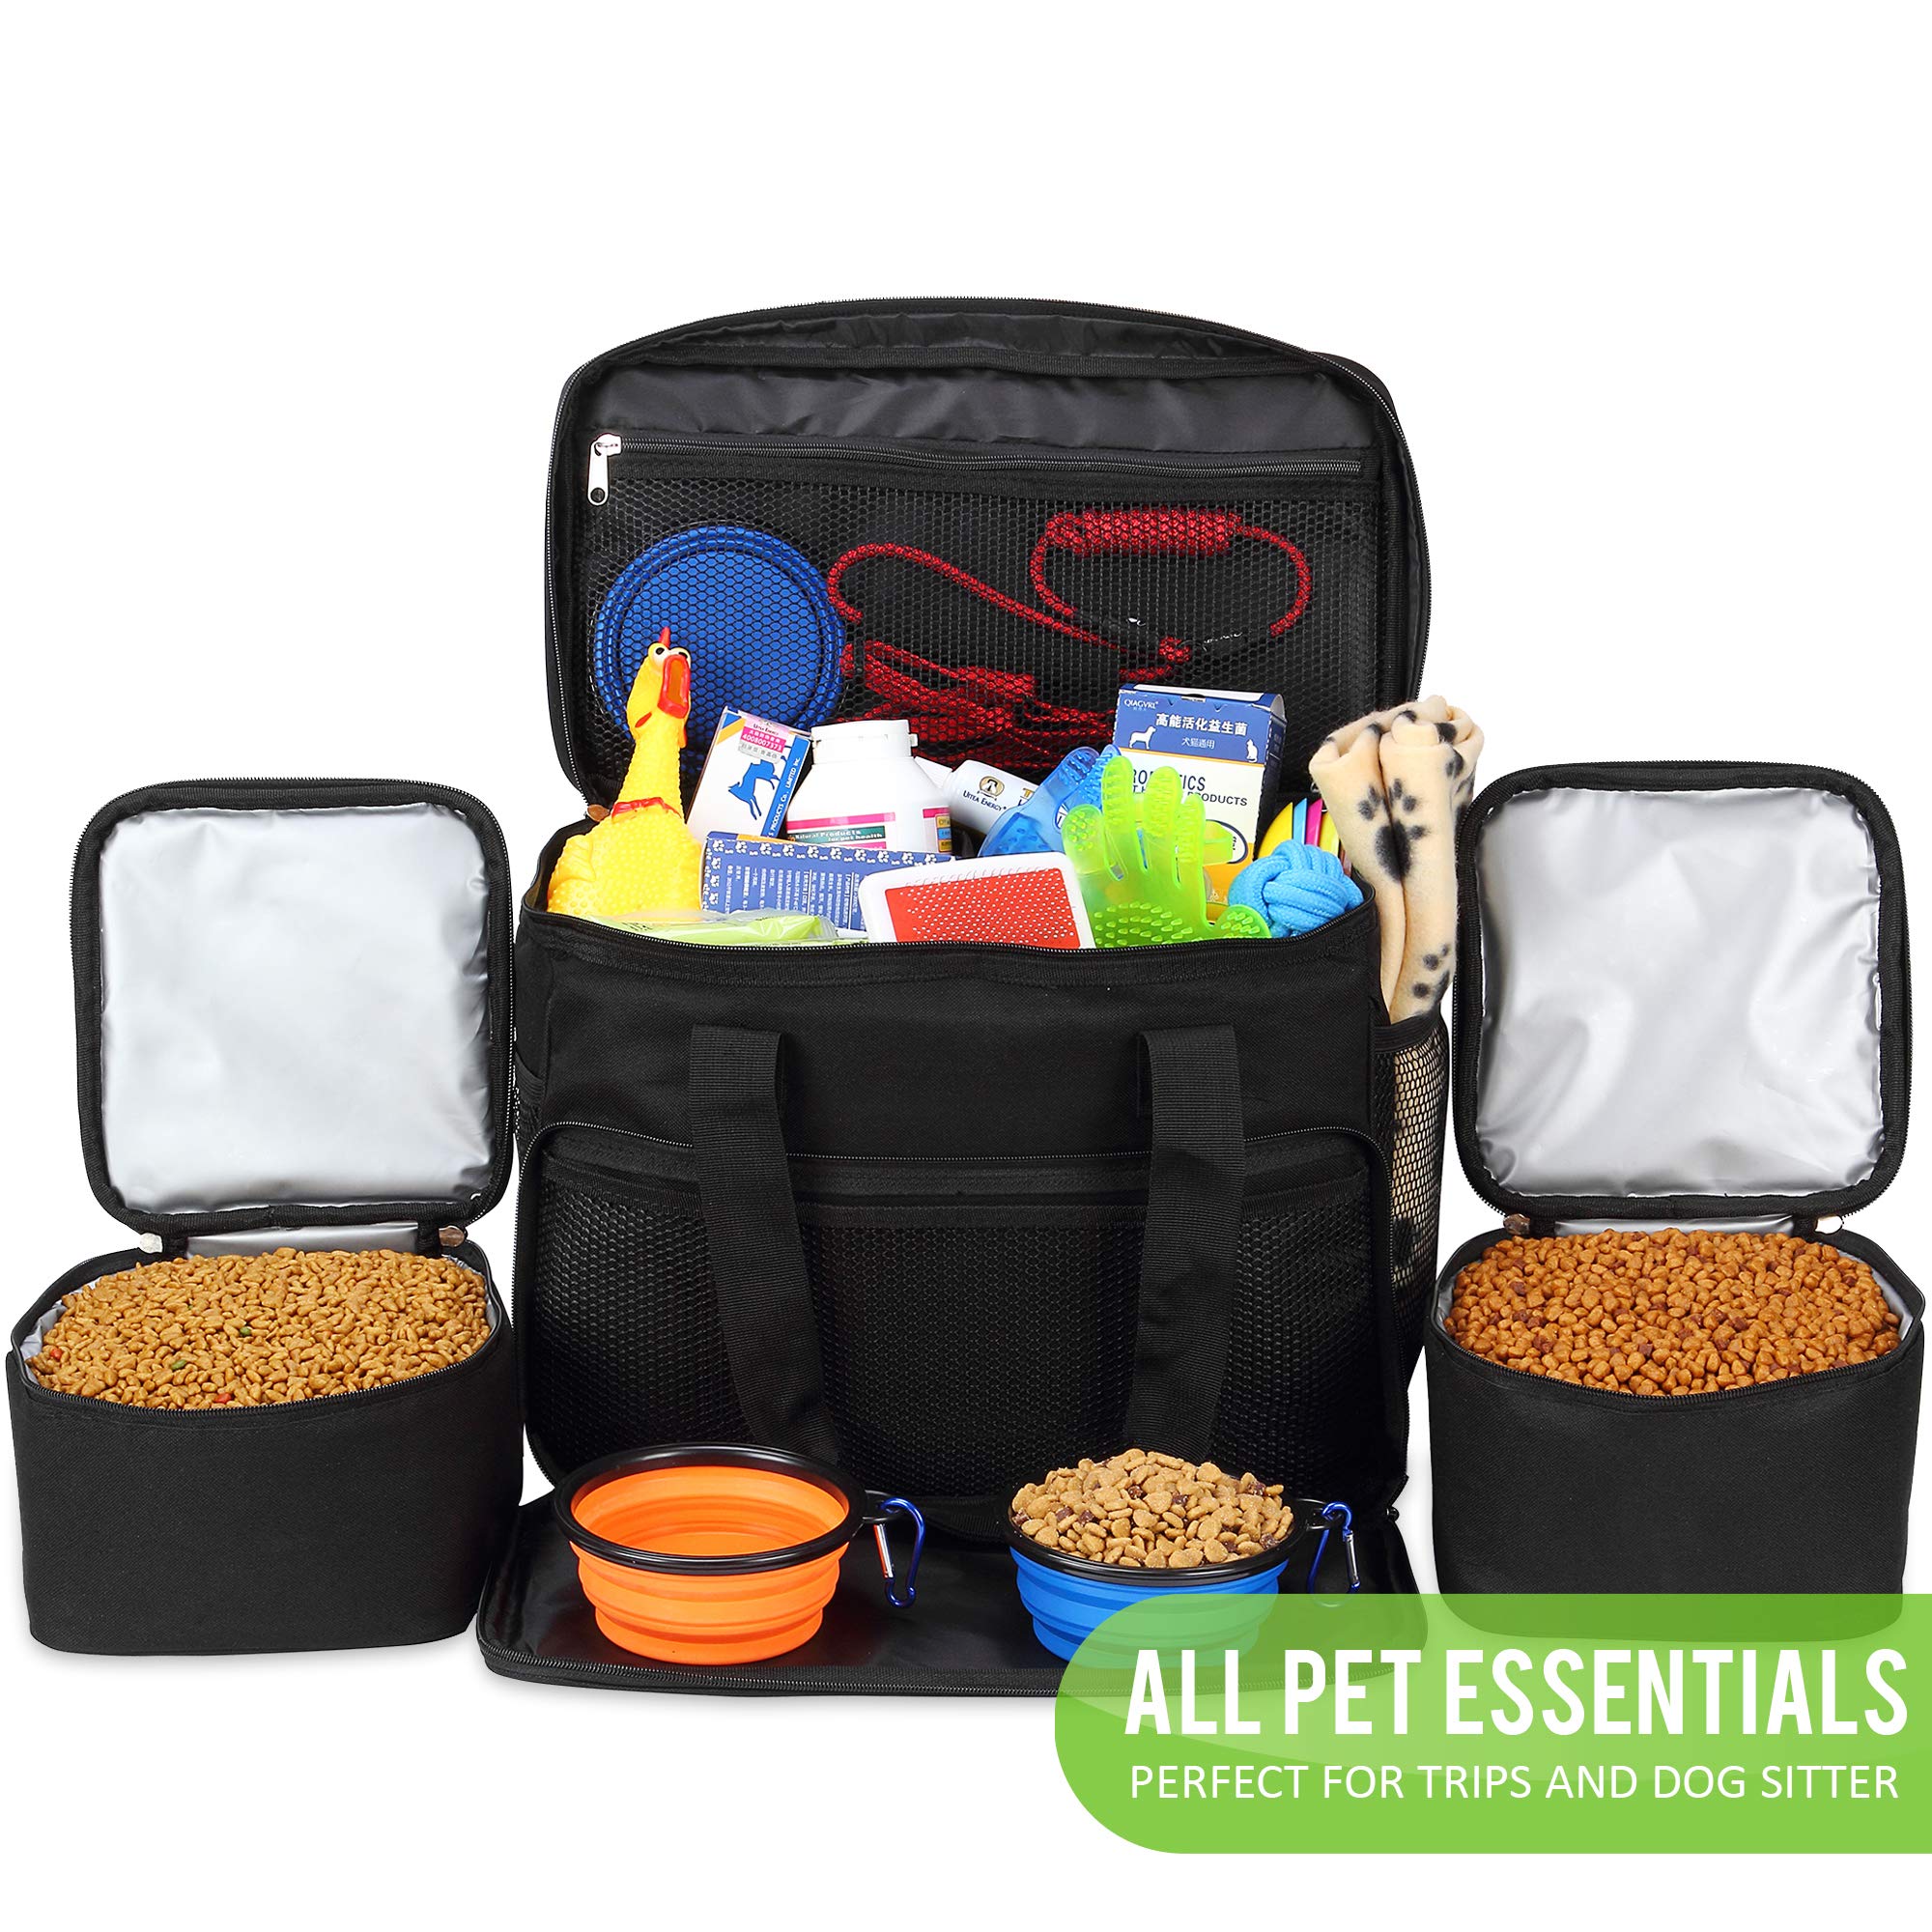 Kong Travel Bag with Travel Pet Food Storage and Pet Bowls - Gray/Red - 5 Piece Set  